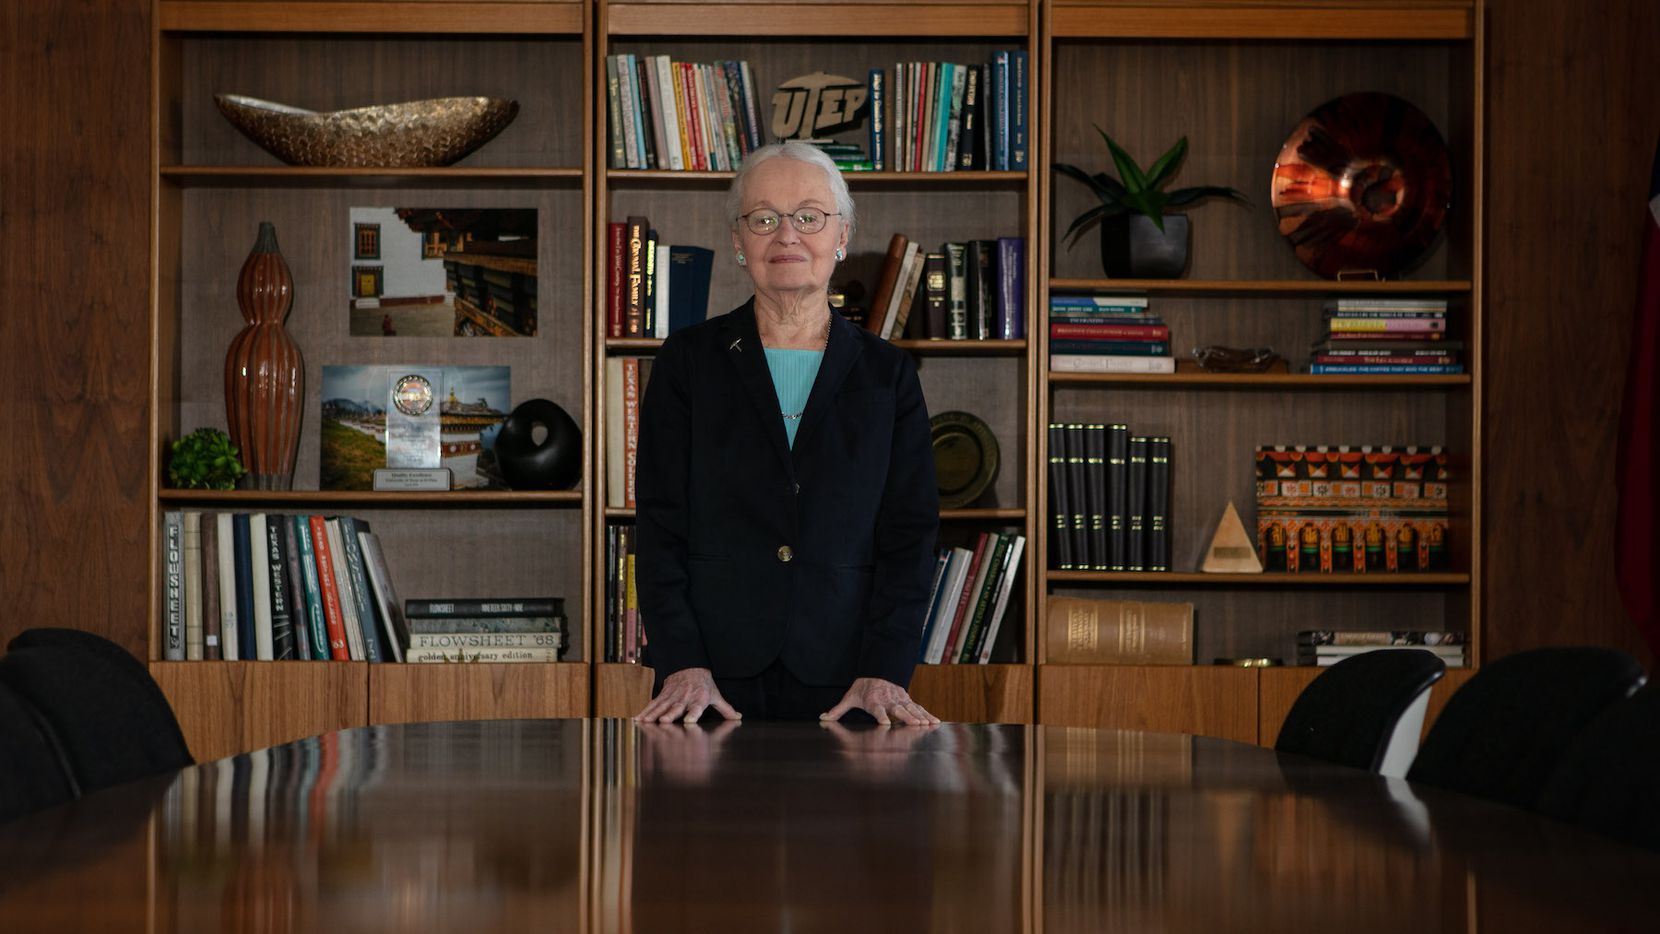 Dr. Diana Natalicio served as president of the University of Texas at El Paso for 31 years....